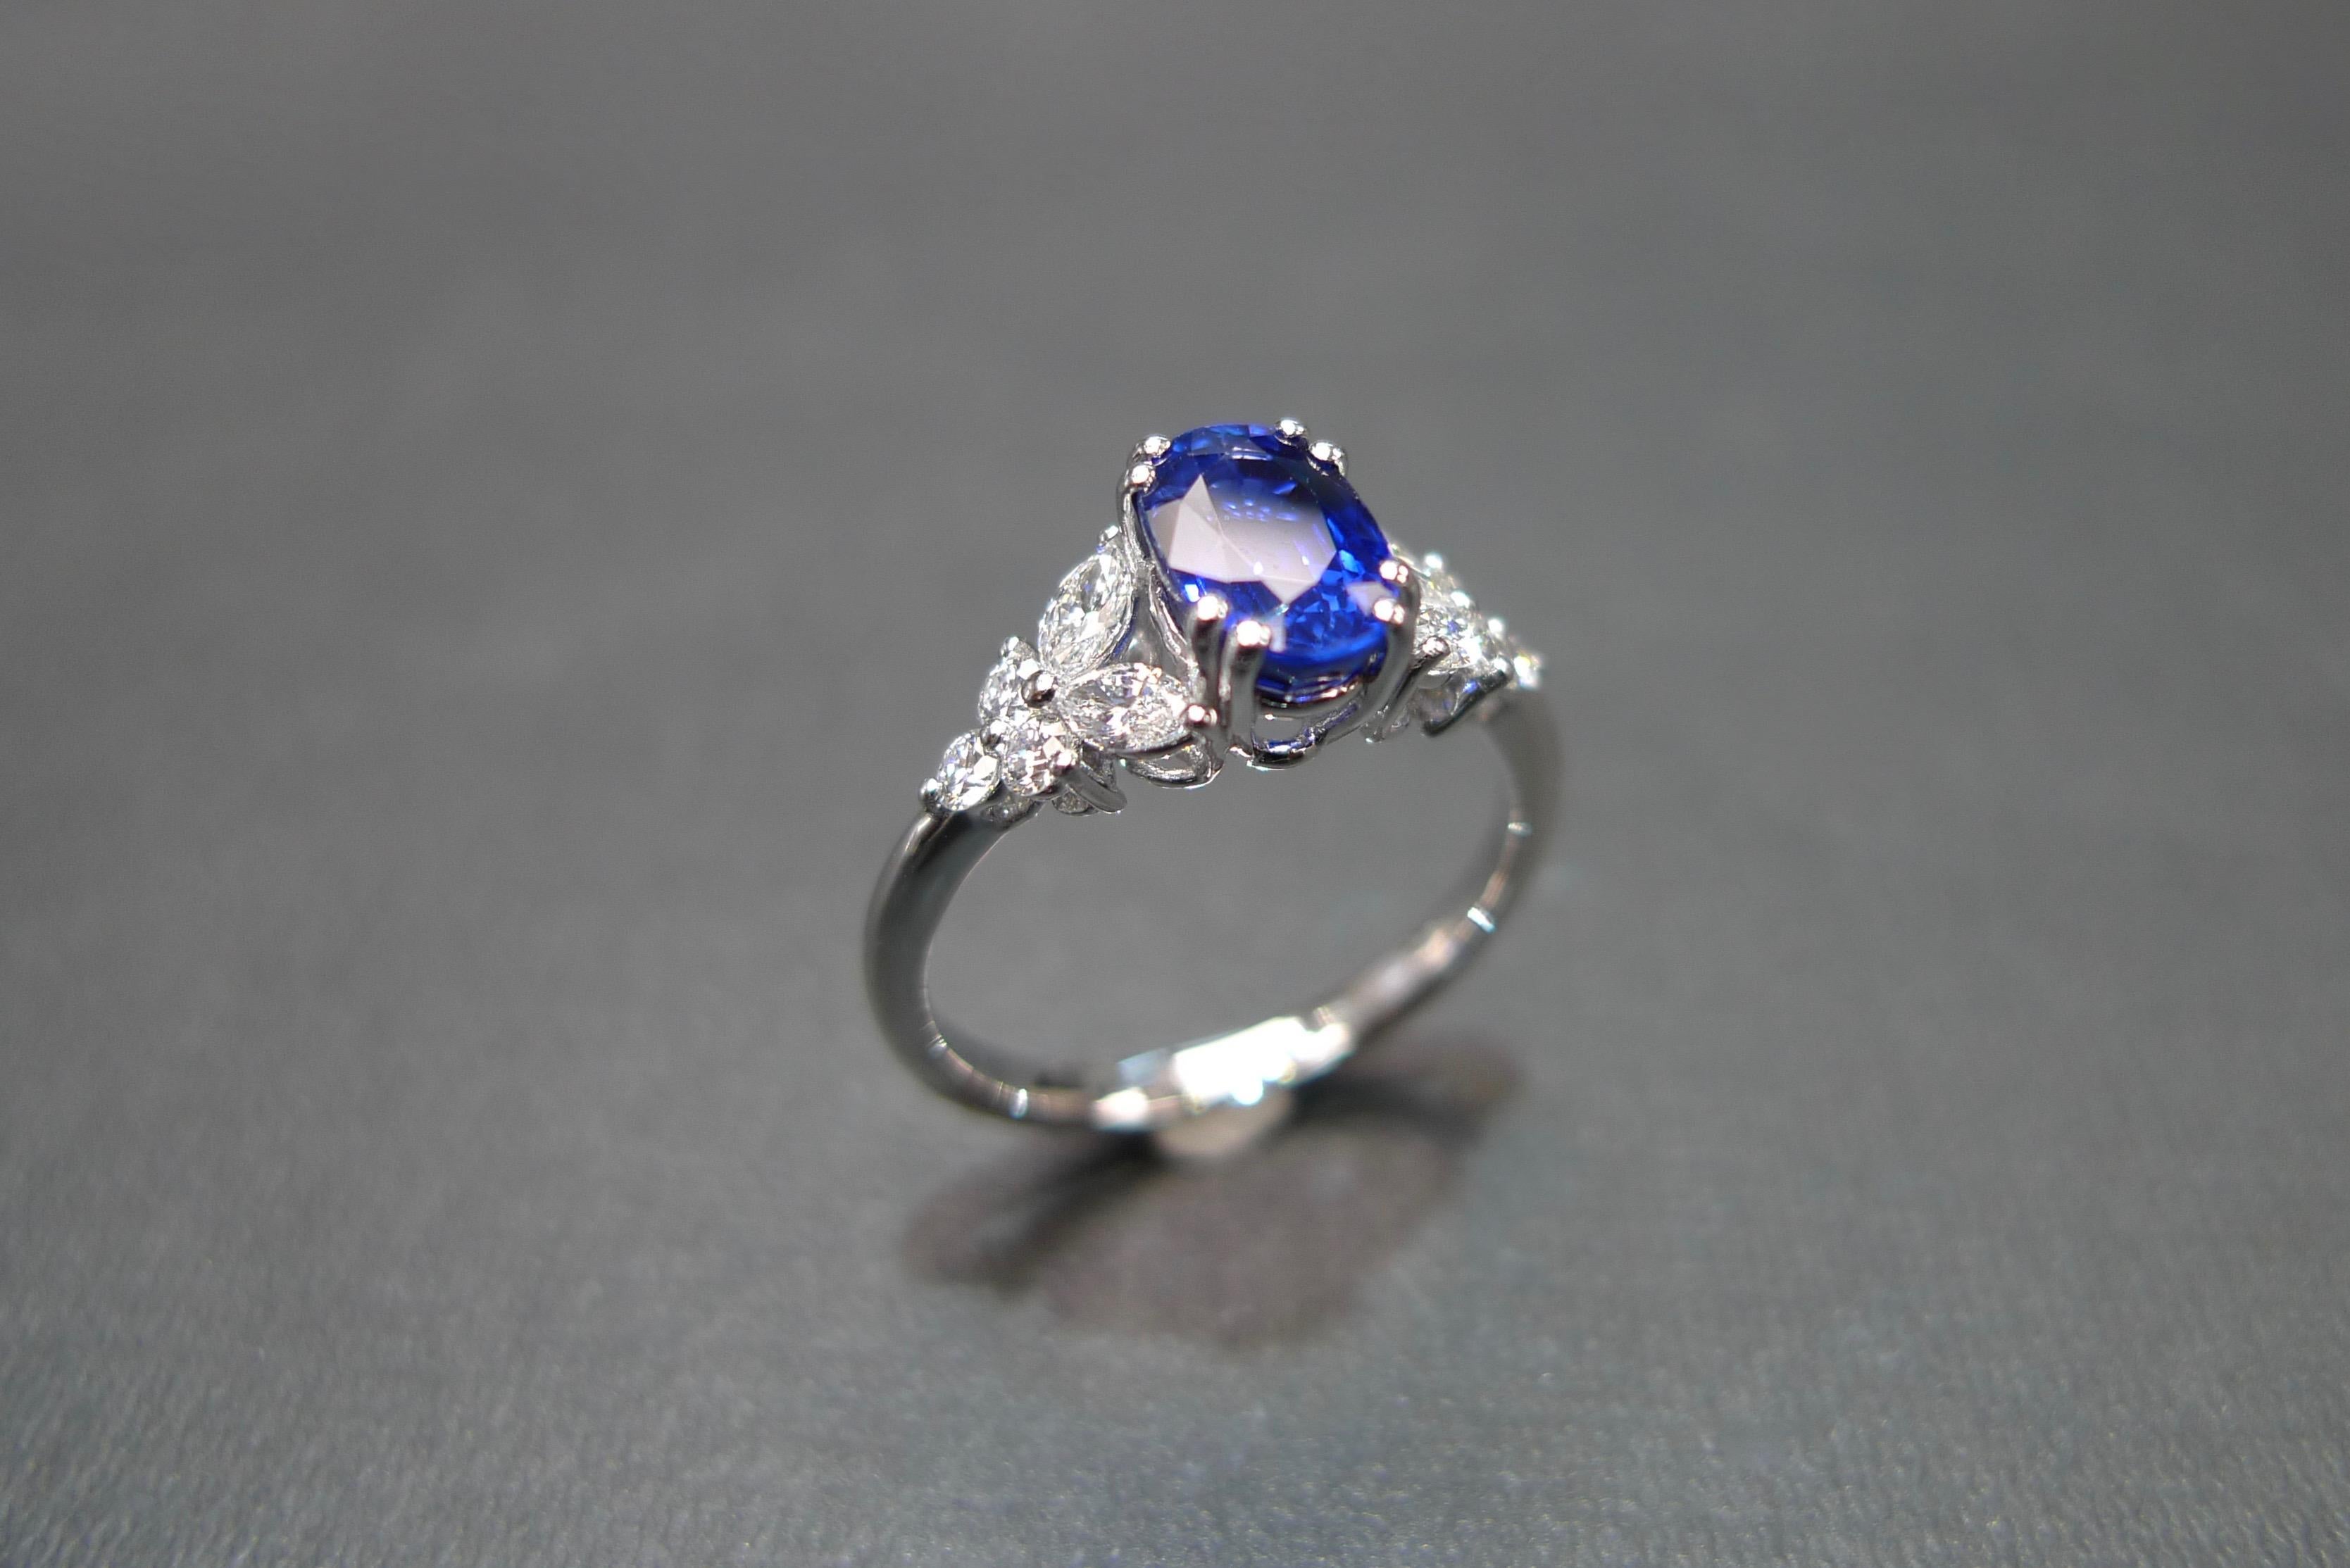 For Sale:  Blue Sapphire Engagement Ring with Marquise Cut Diamond in 18K White Gold 11